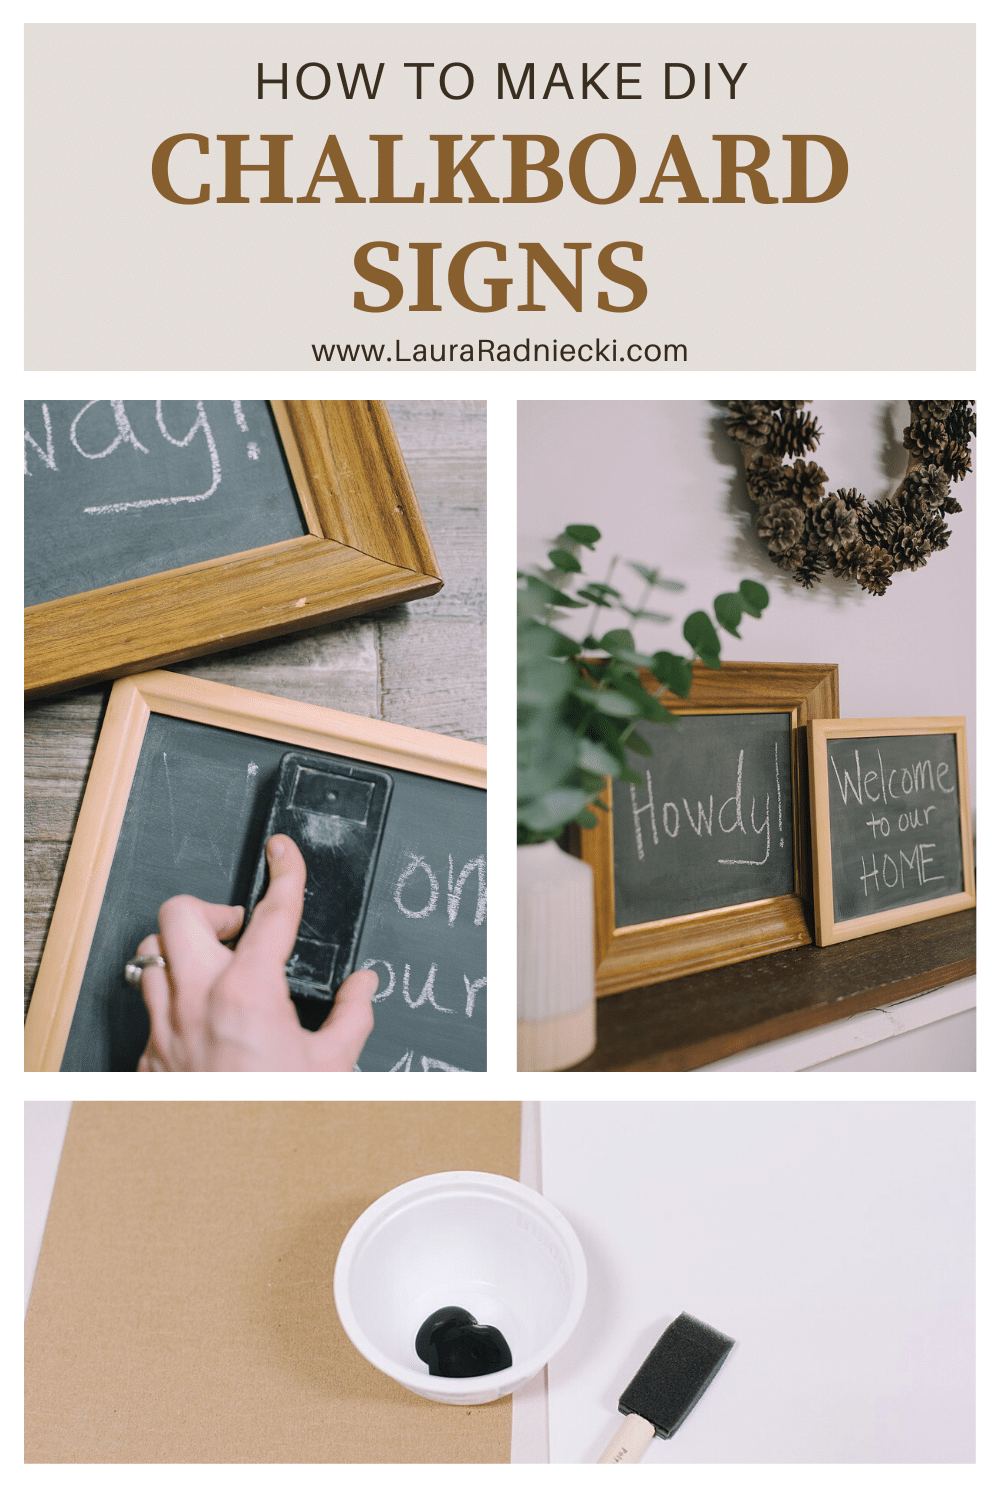 How to Make DIY Chalkboard Signs